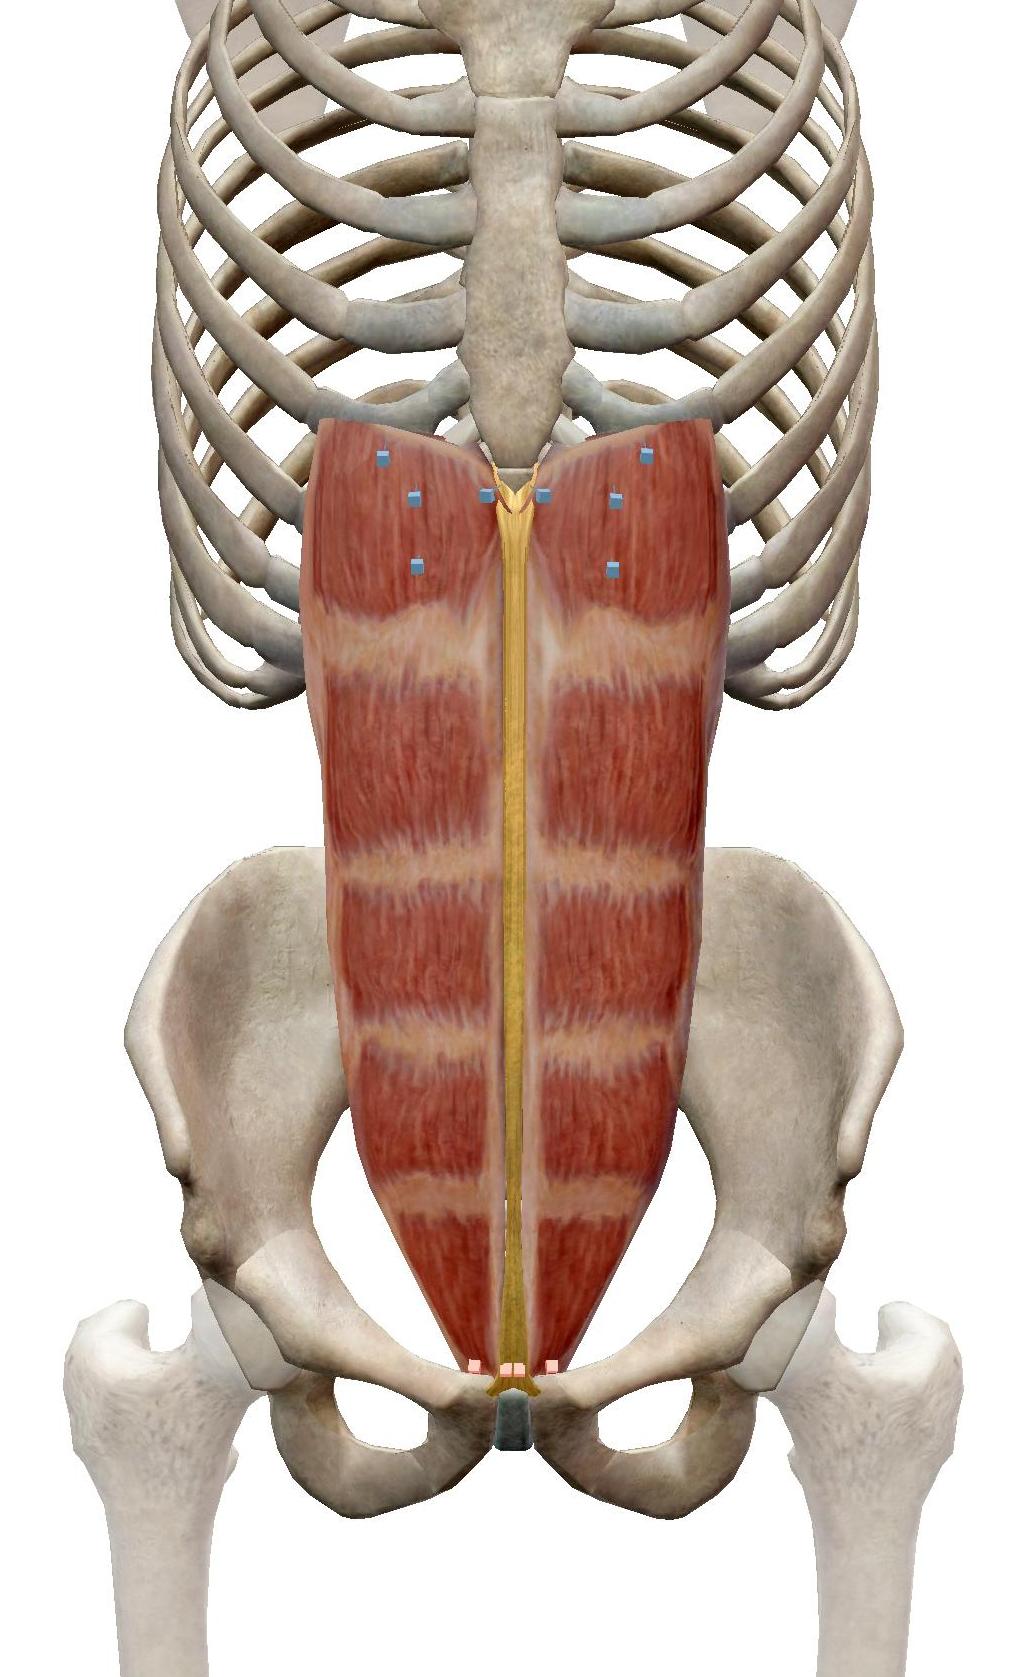 rectus abdominis muscles with linea alba showing as central line